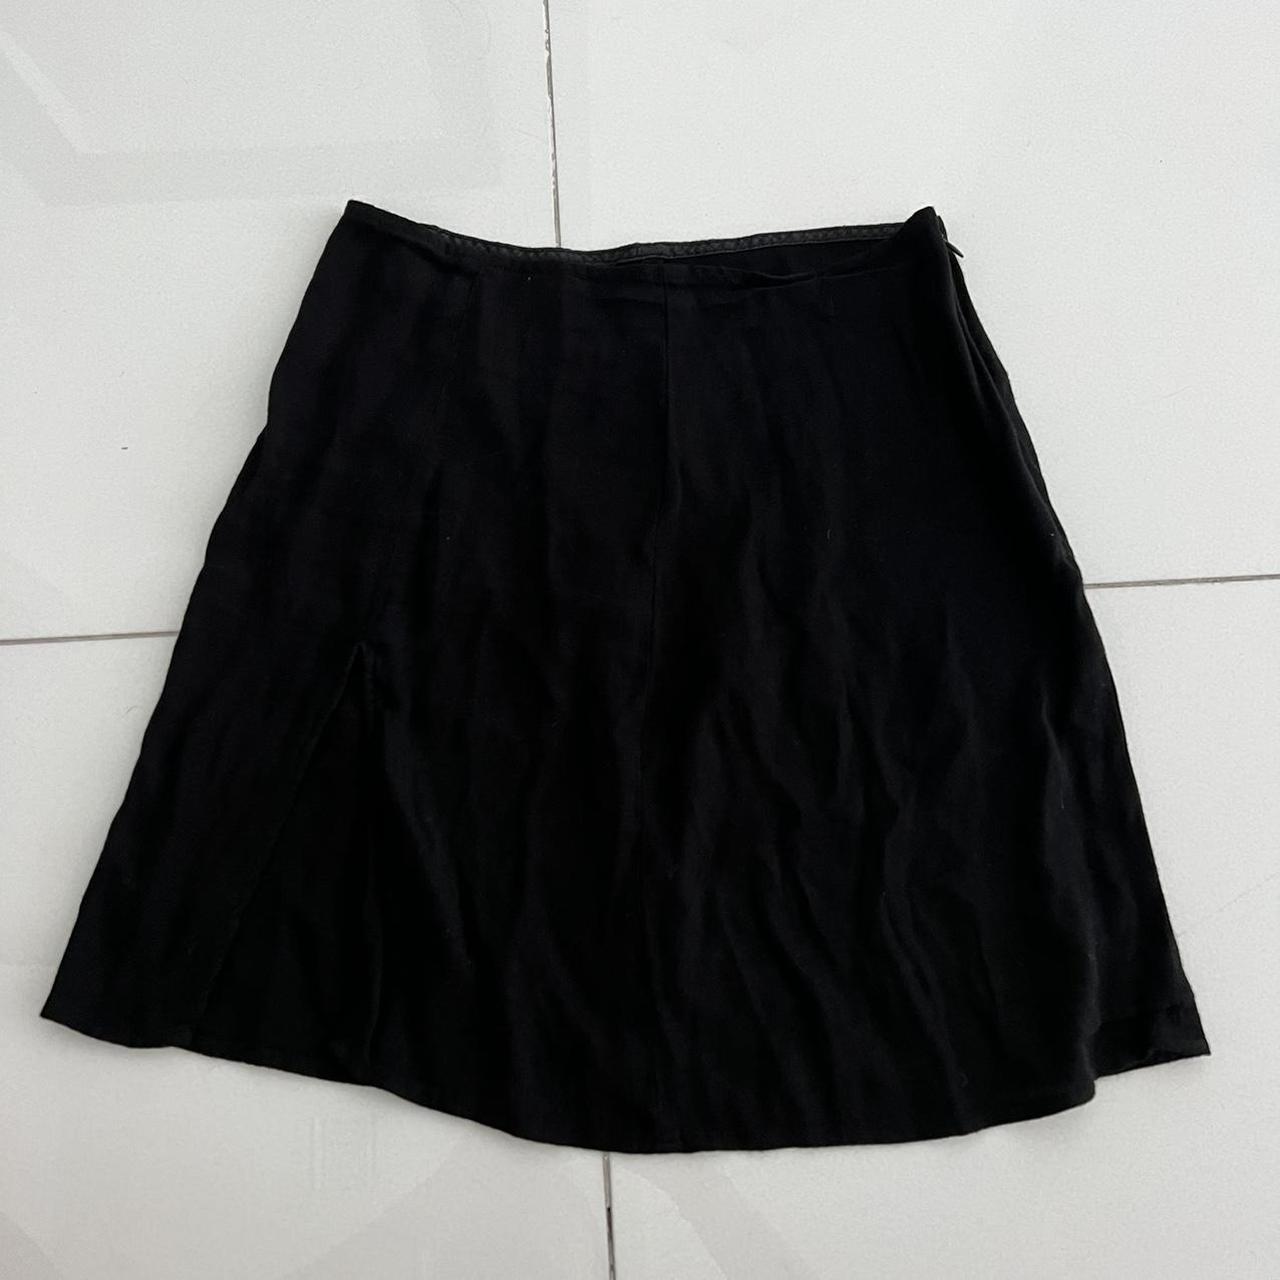 Product Image 2 - Reformation black linen skirt
Size: 4
Price: